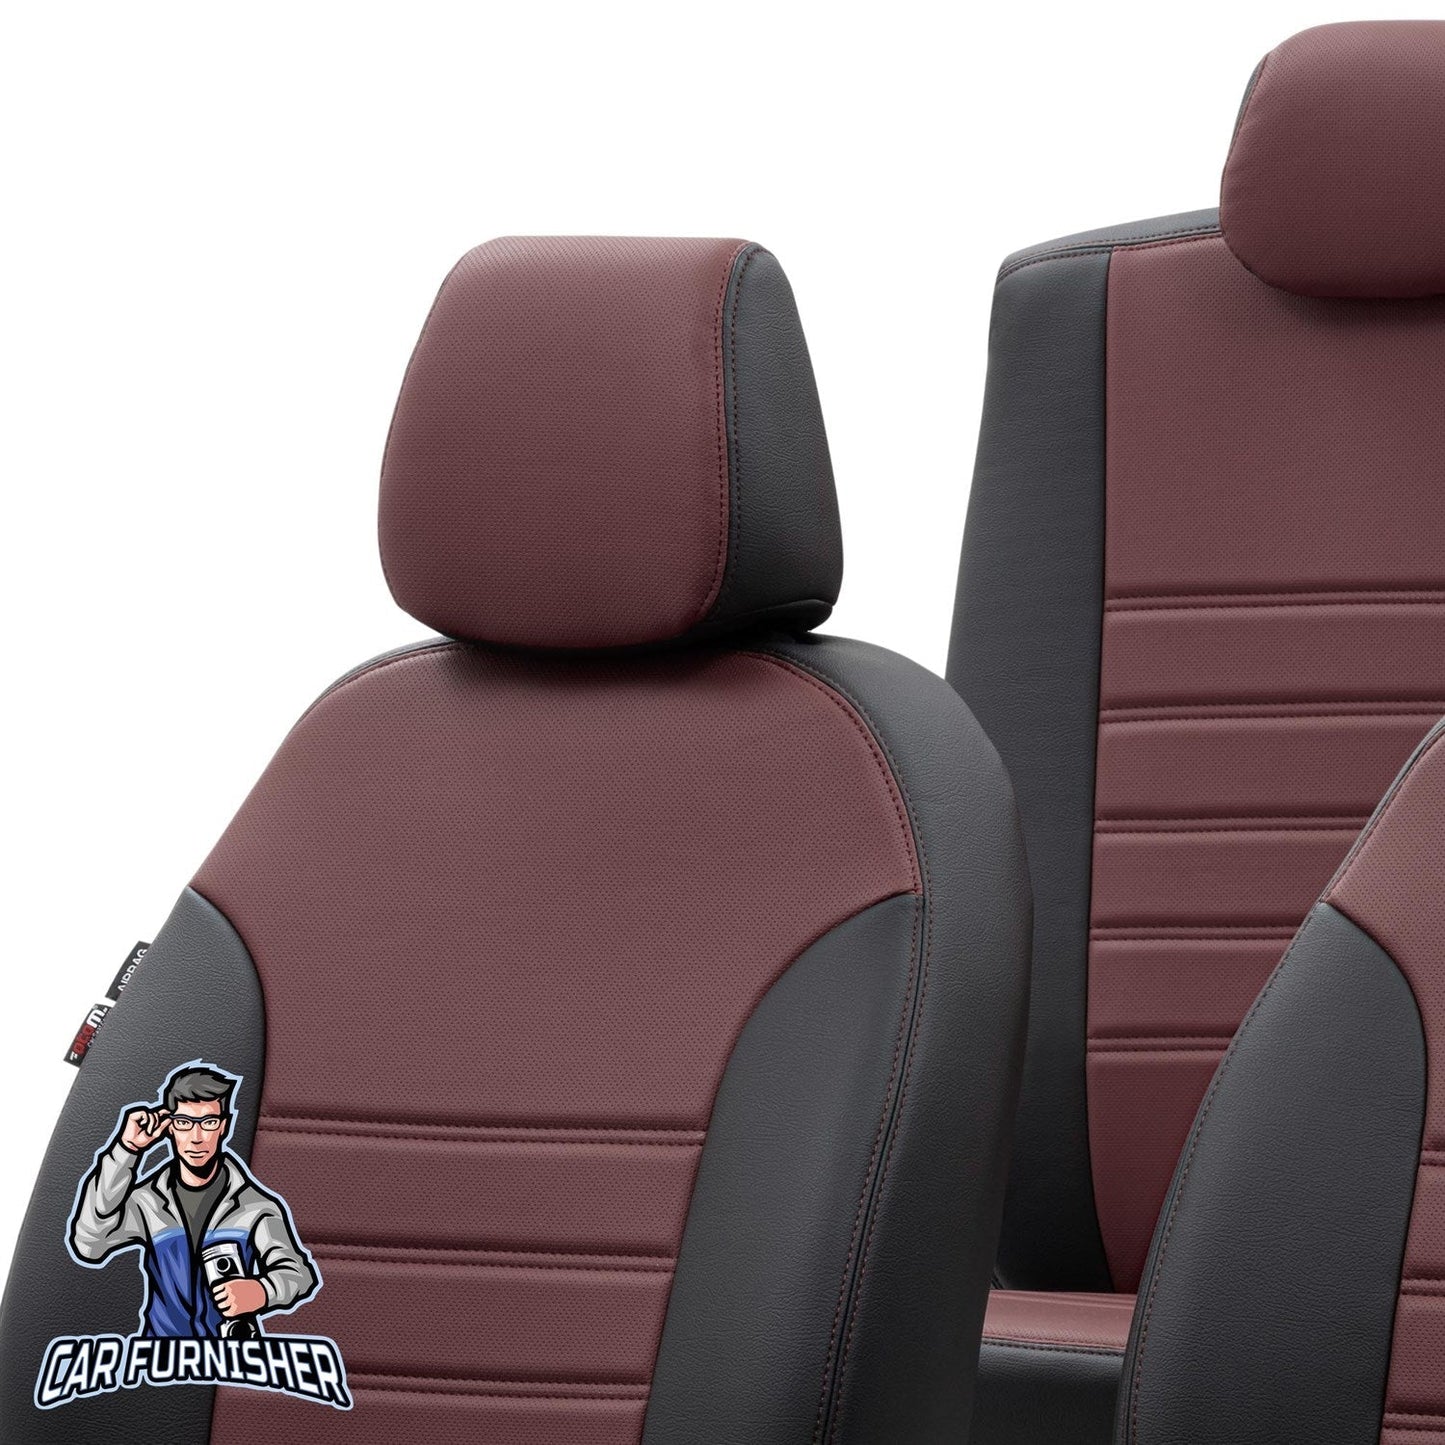 Iveco Eurocargo Seat Cover Istanbul Leather Design Burgundy Leather